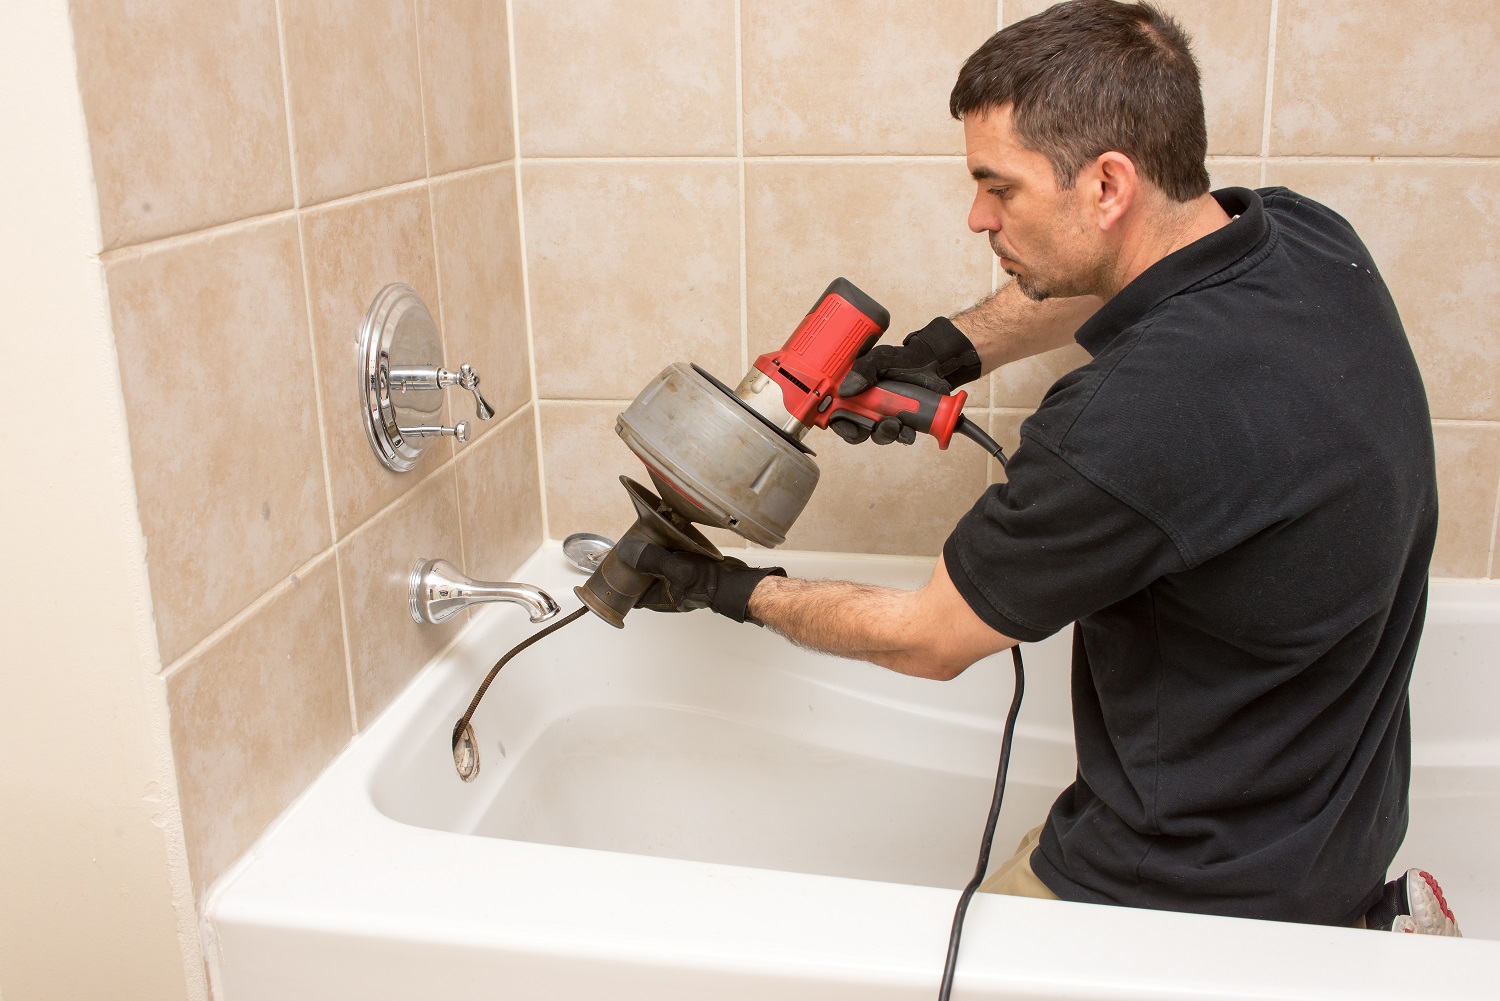 Slow Draining Or Clogged Bathtub, Sink And Bathtub Clogged At The Same Time